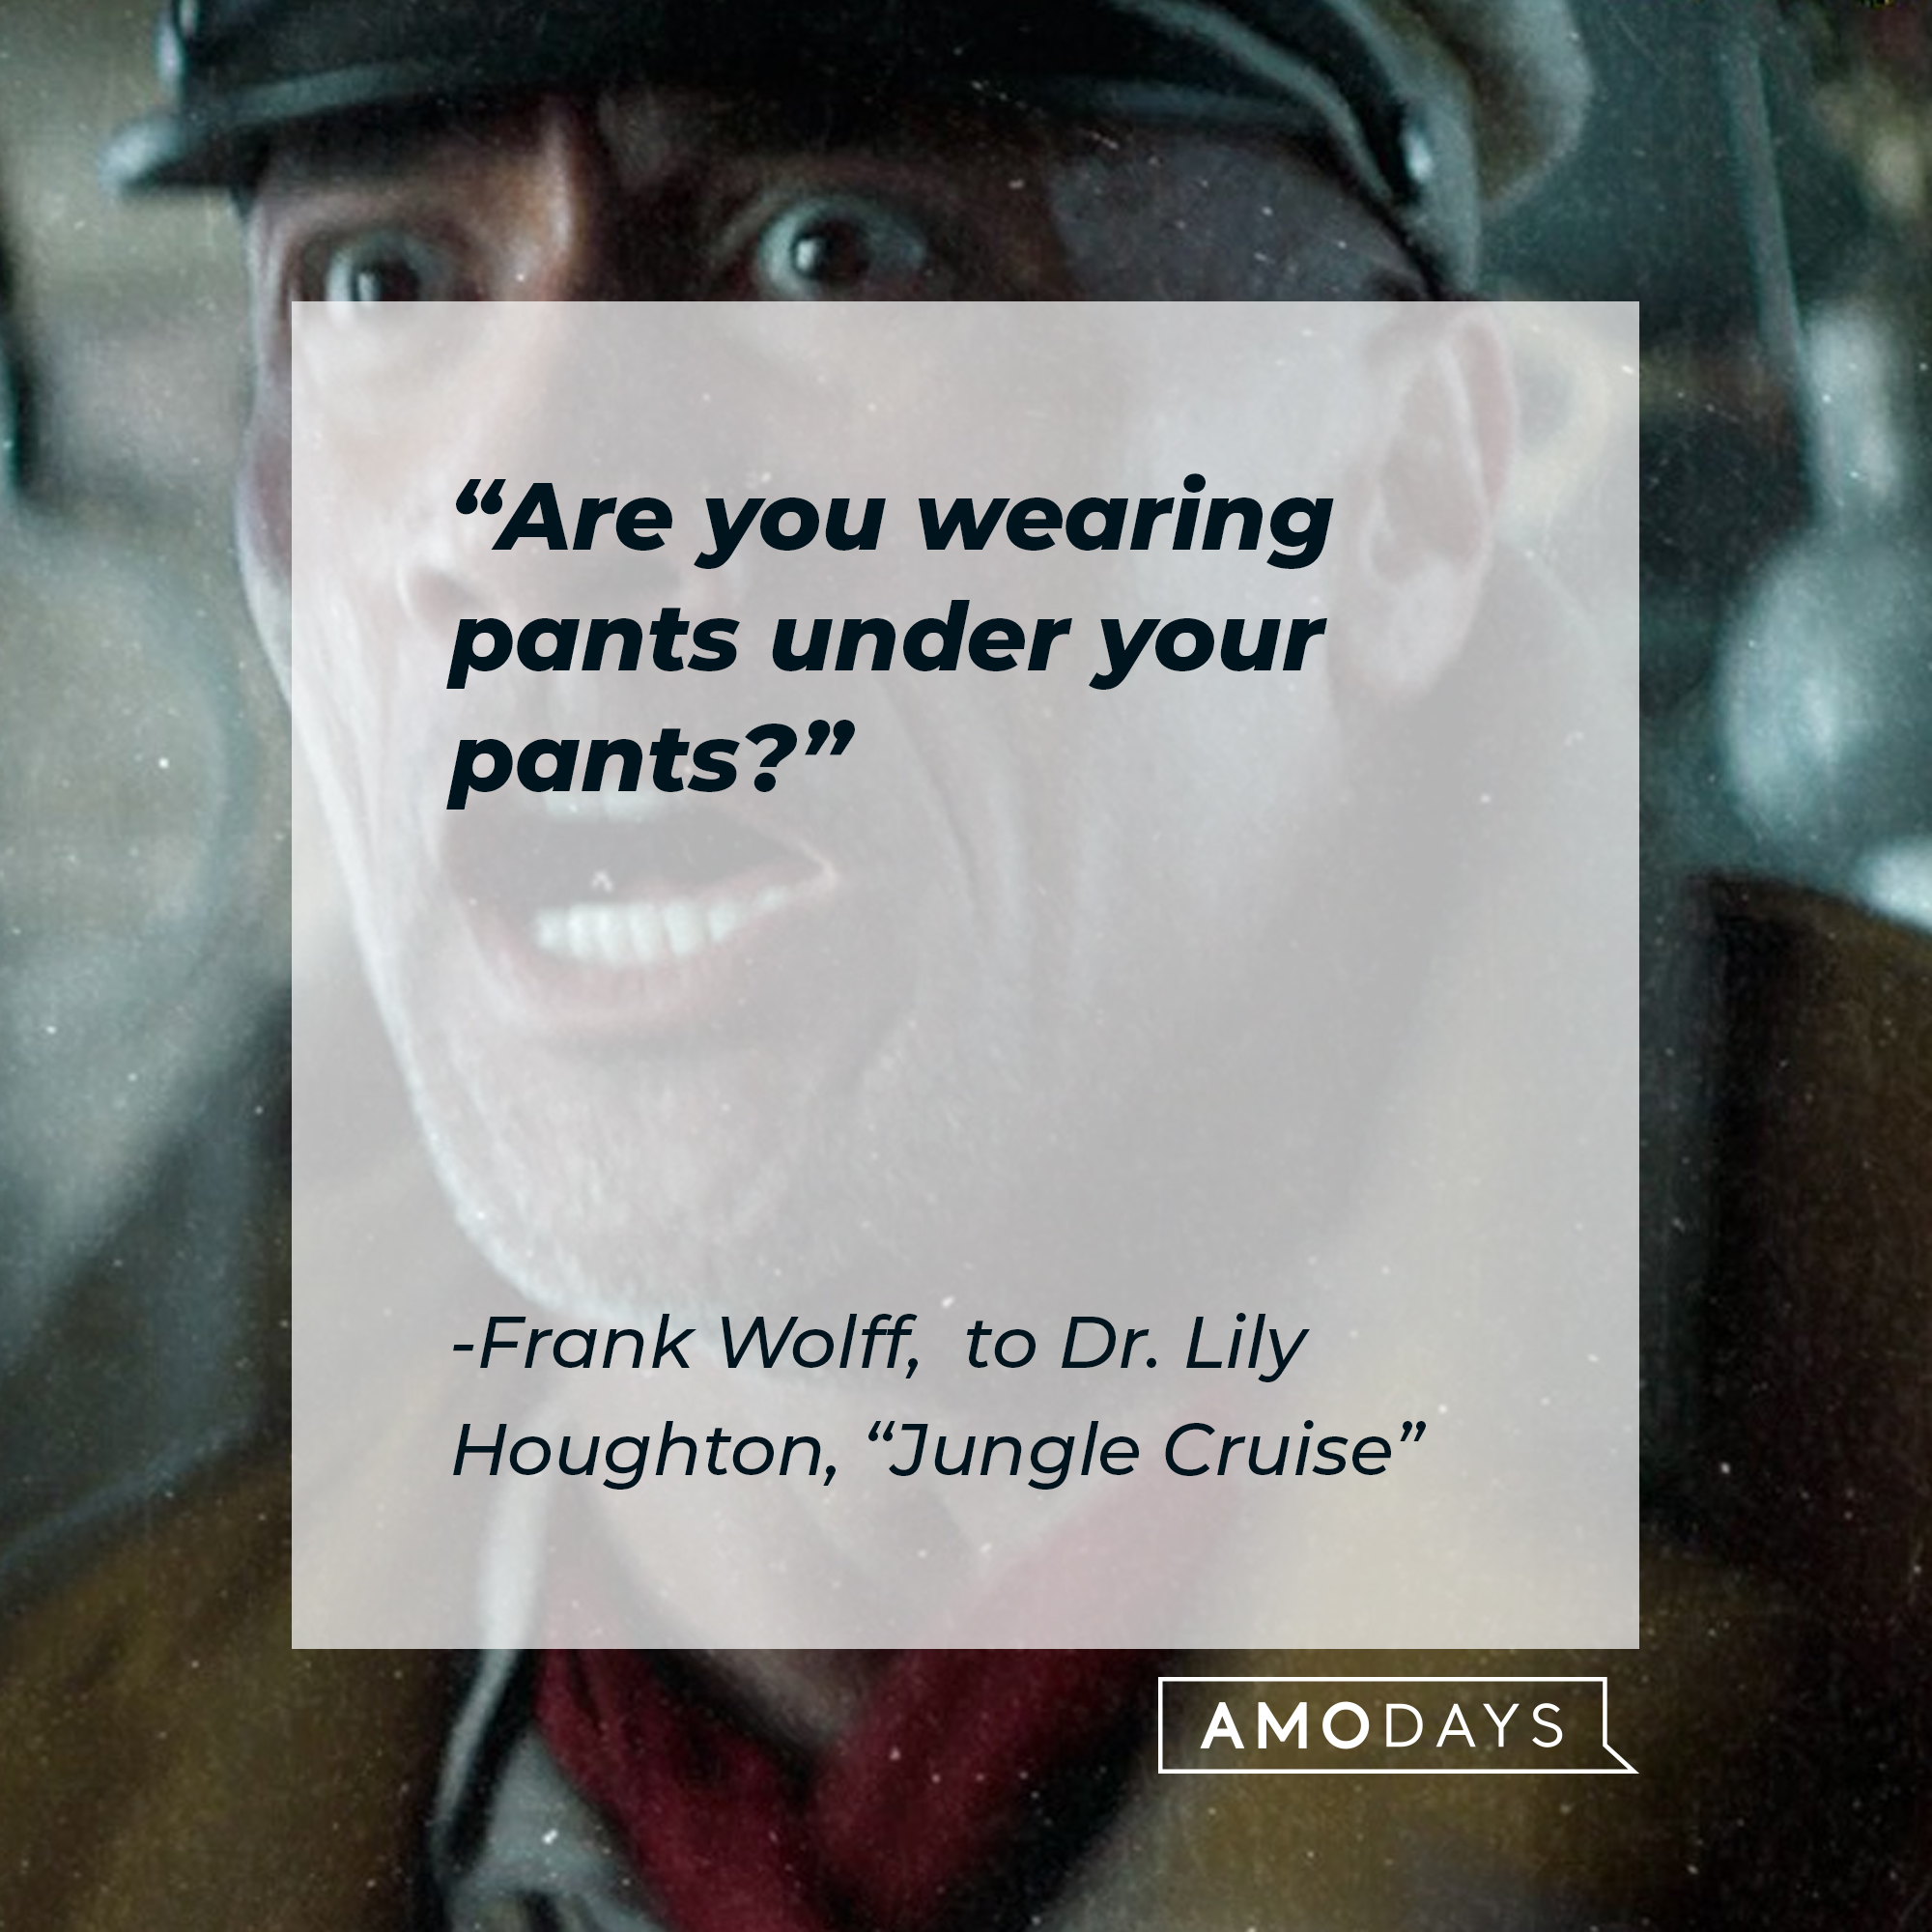 Frank Wolff’s quote: "Are you wearing pants under your pants?" | Image: facebook.com/JungleCruise